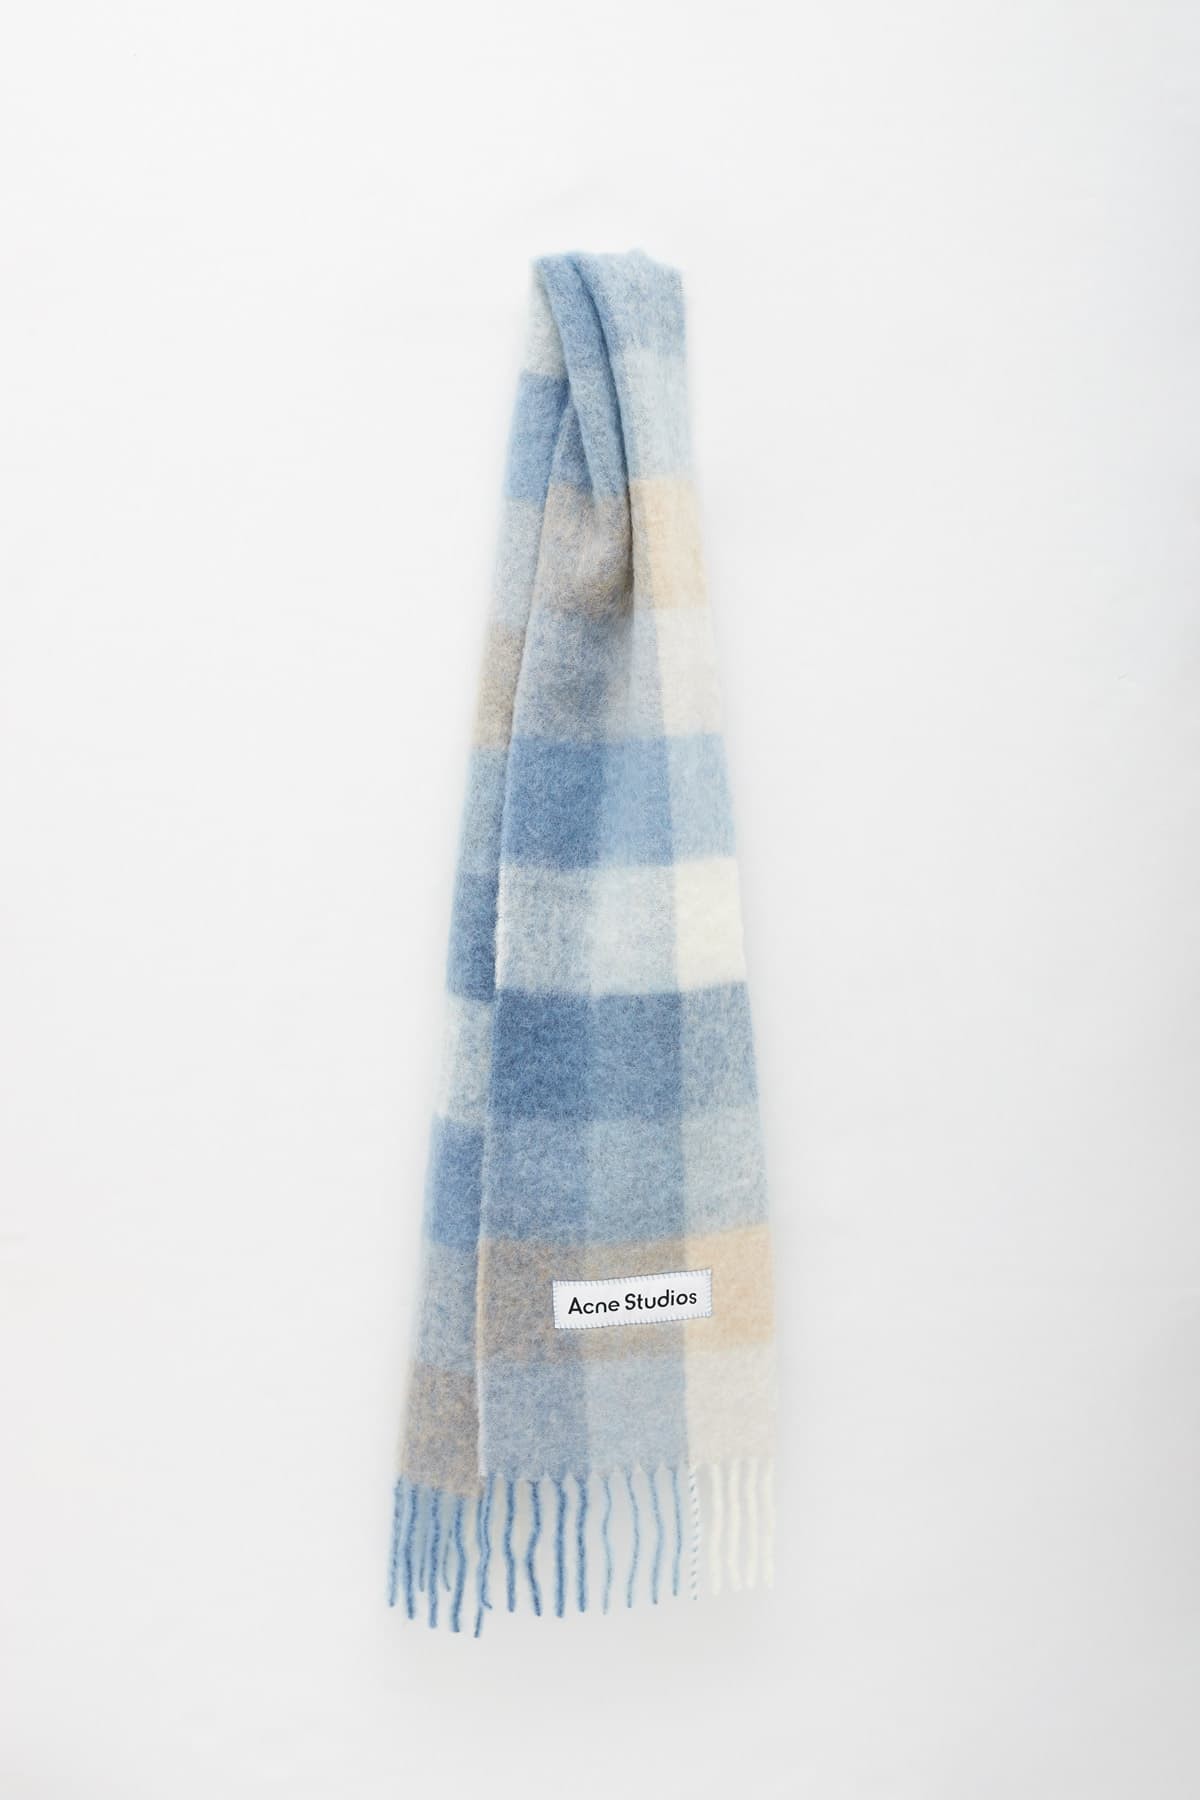 ACNE STUDIOS PASTEL BLUE BEIGE MOHAIR CHECKED SCARF IAMNUE